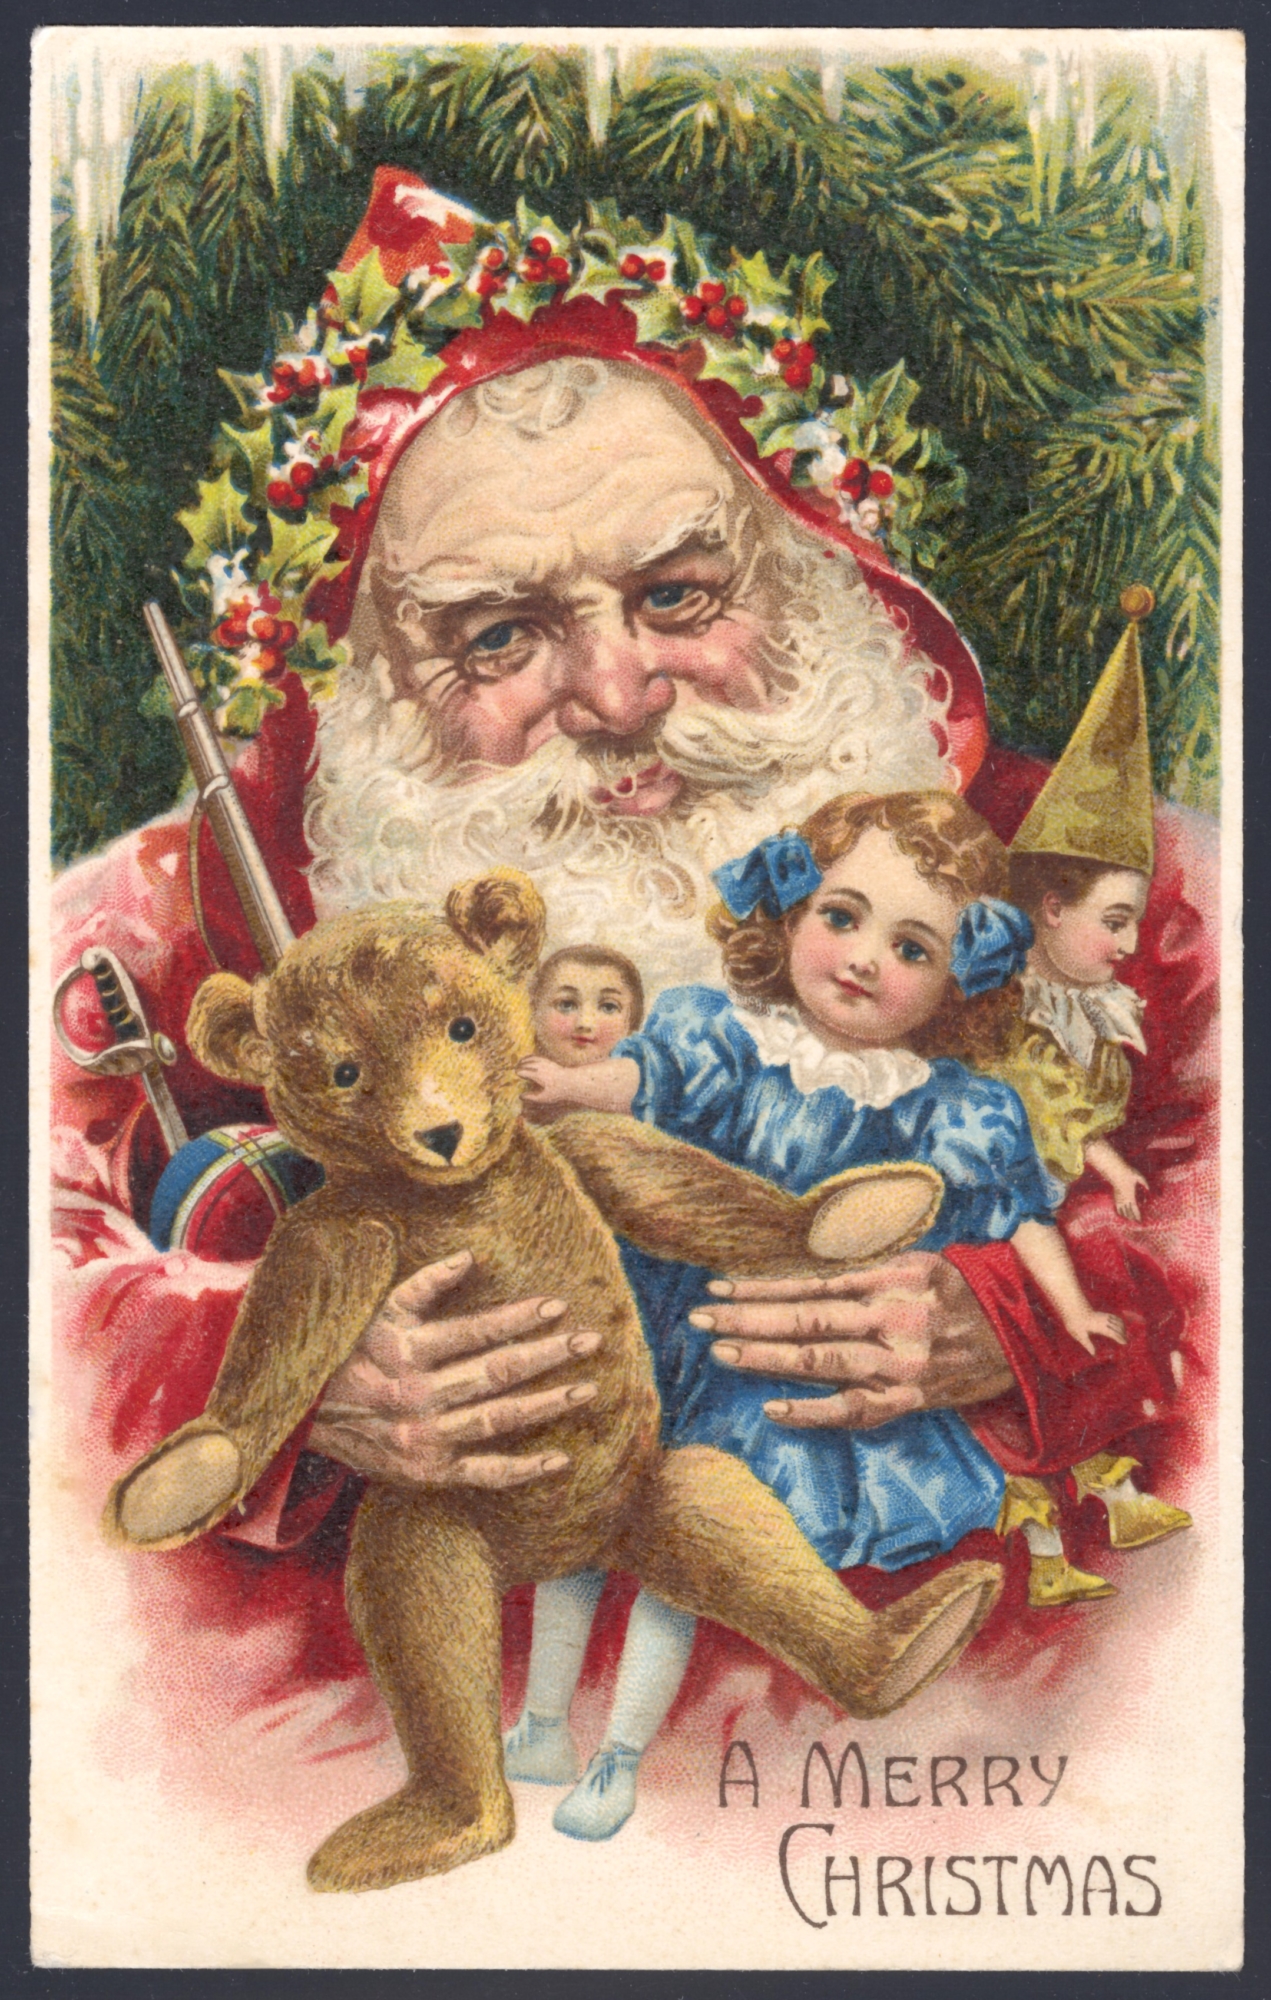 Santa wearing a red robe. Lithographed in Germany (flat)